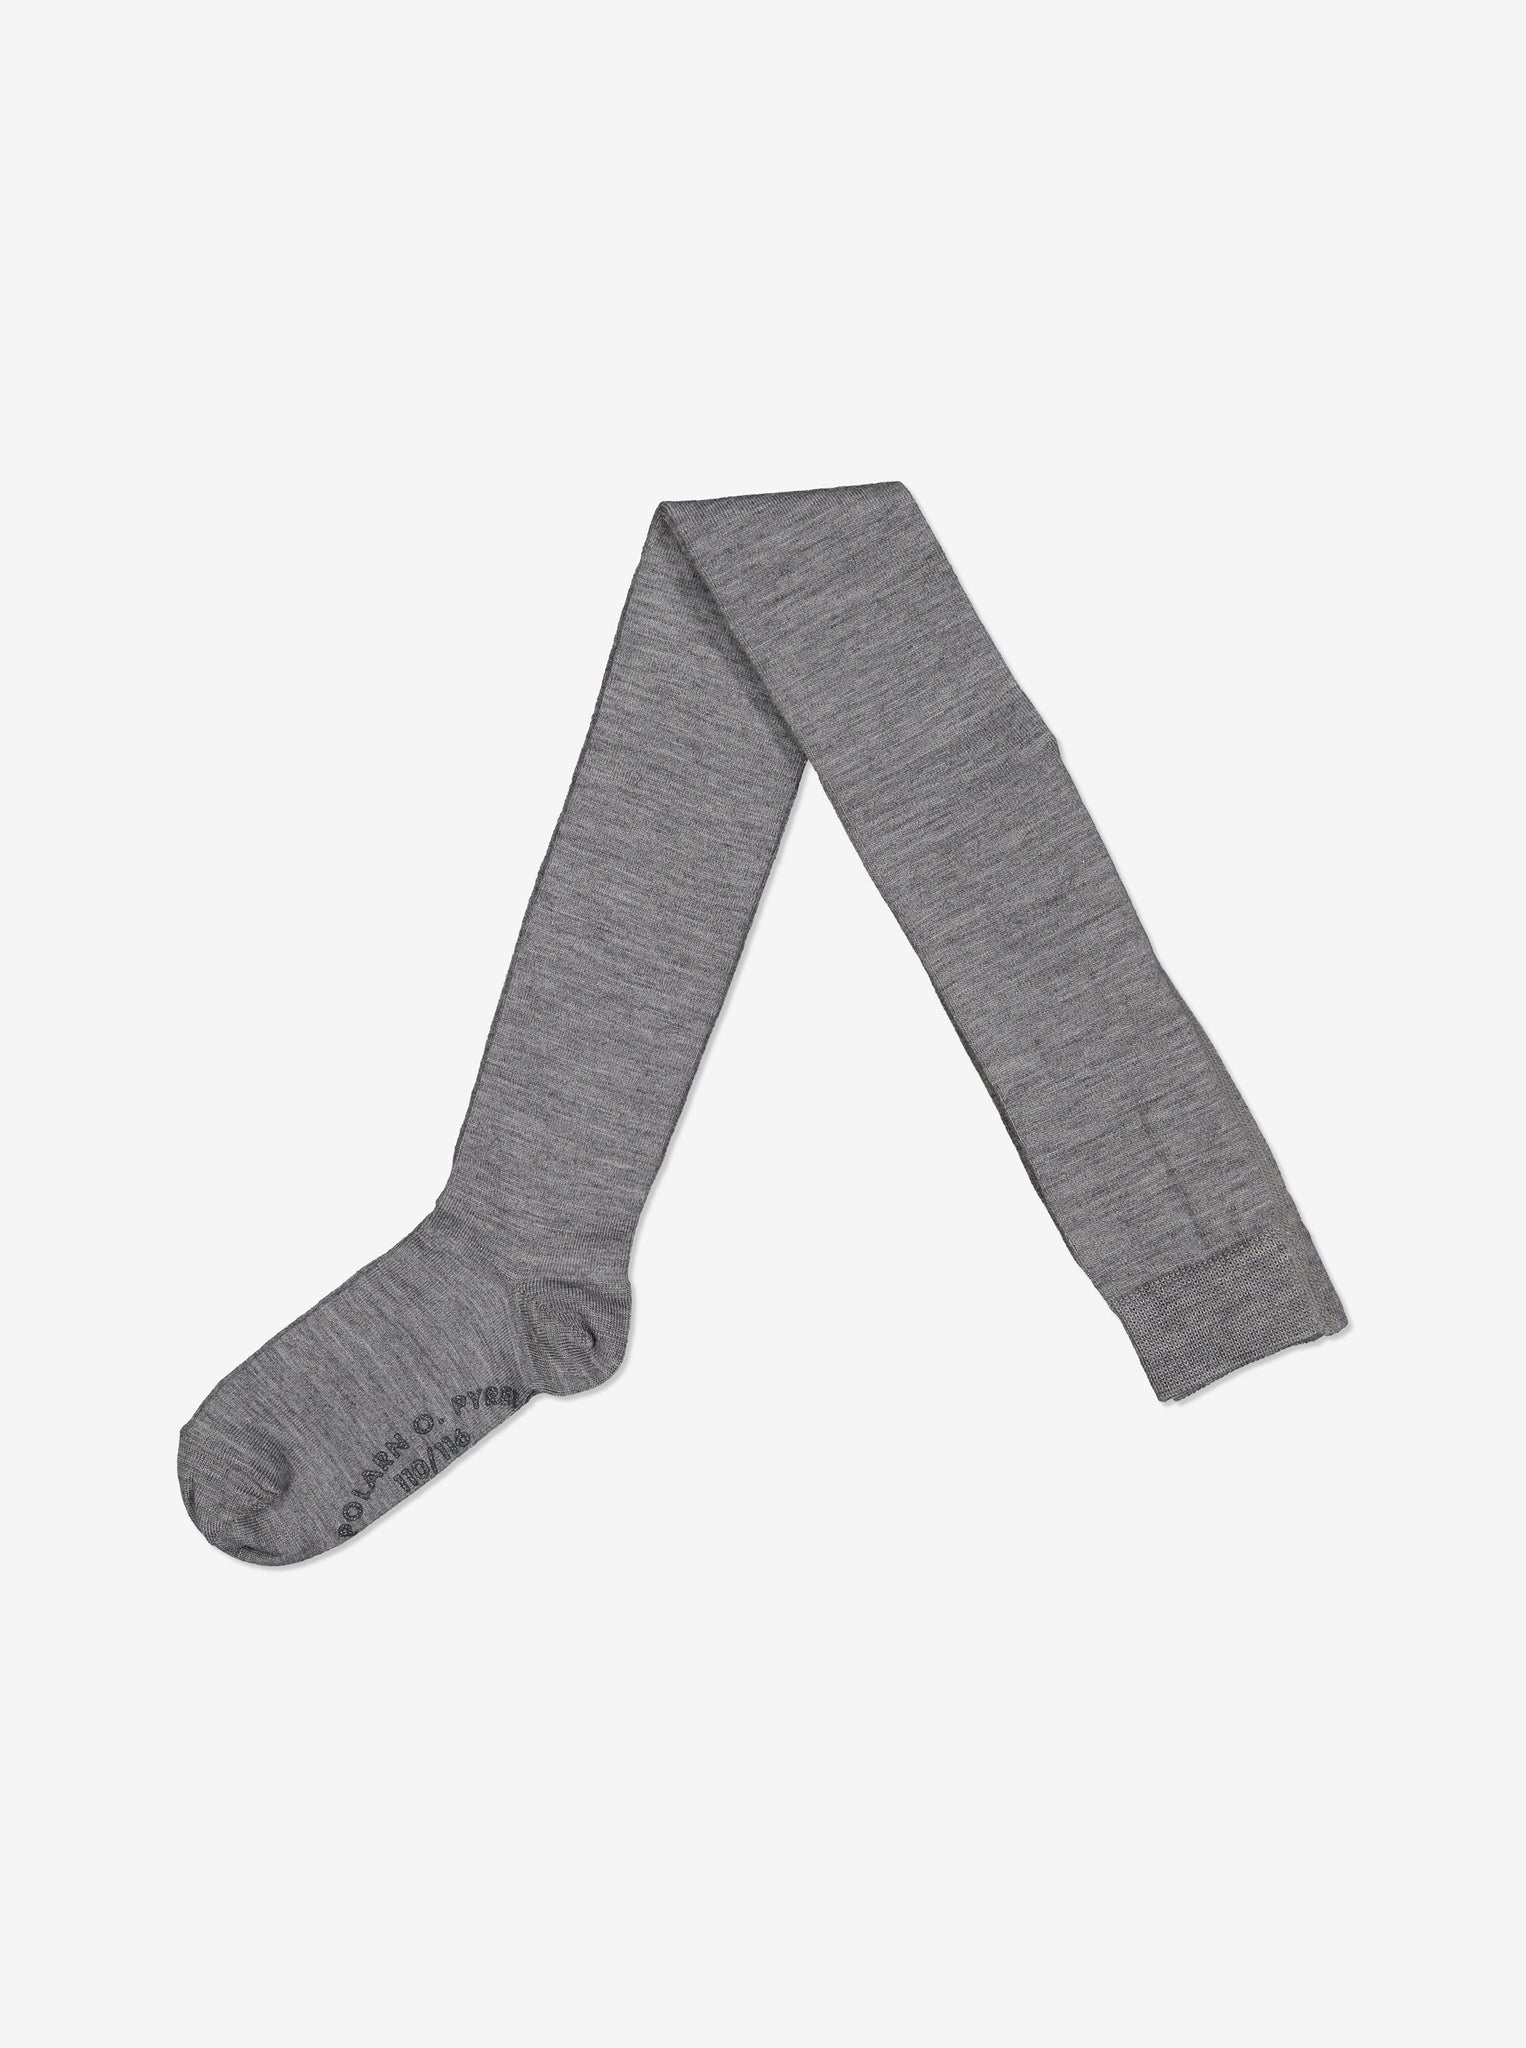 Merino Antislip Kids Tights, warm and comfortable, using ethically sourced products, polarn o. pyret quality 